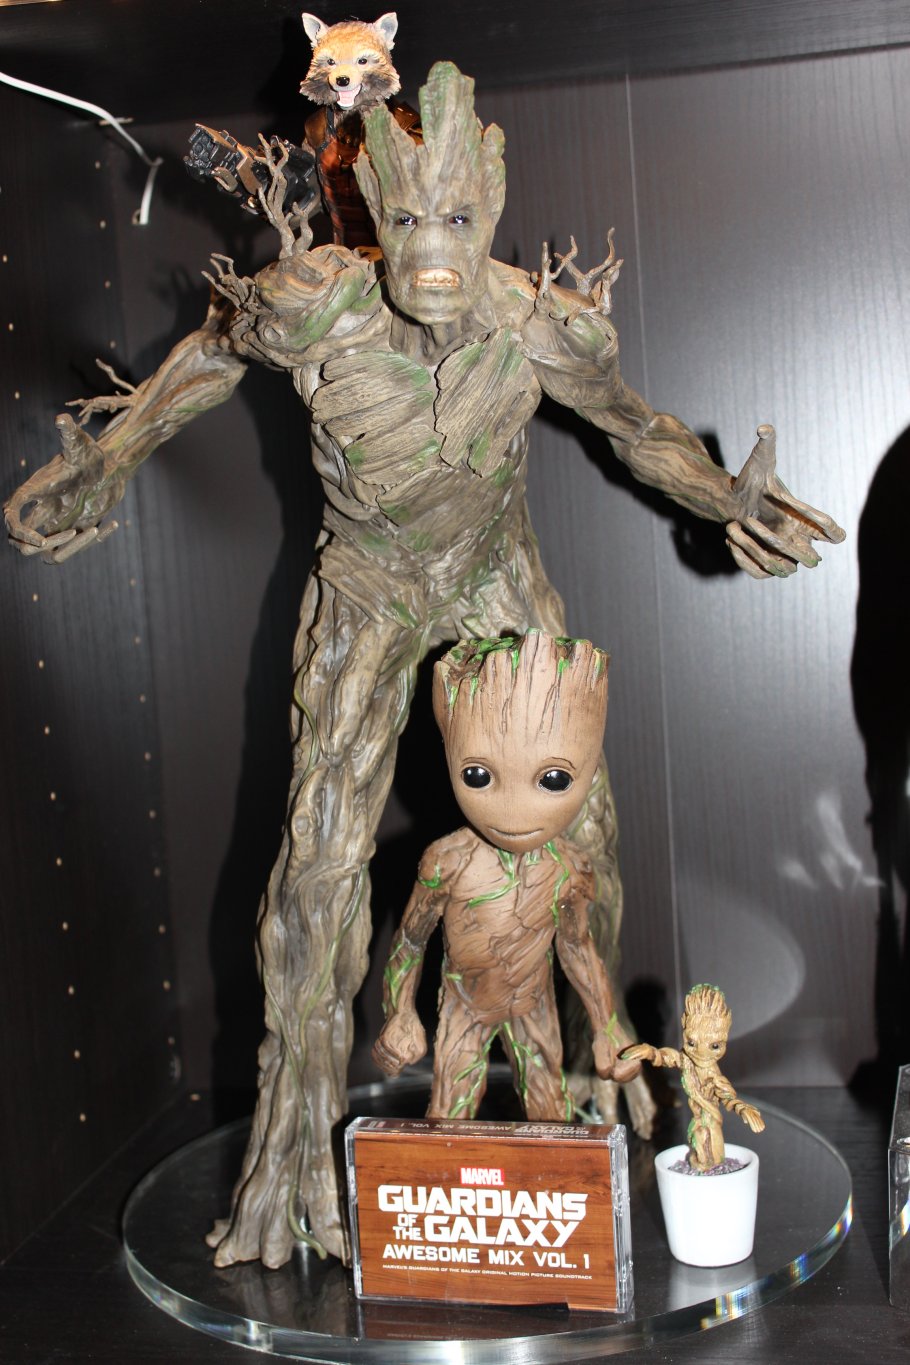 NECA Actionfigur Guardians of the Galaxy 2 Lifesize Foam Figur Groot